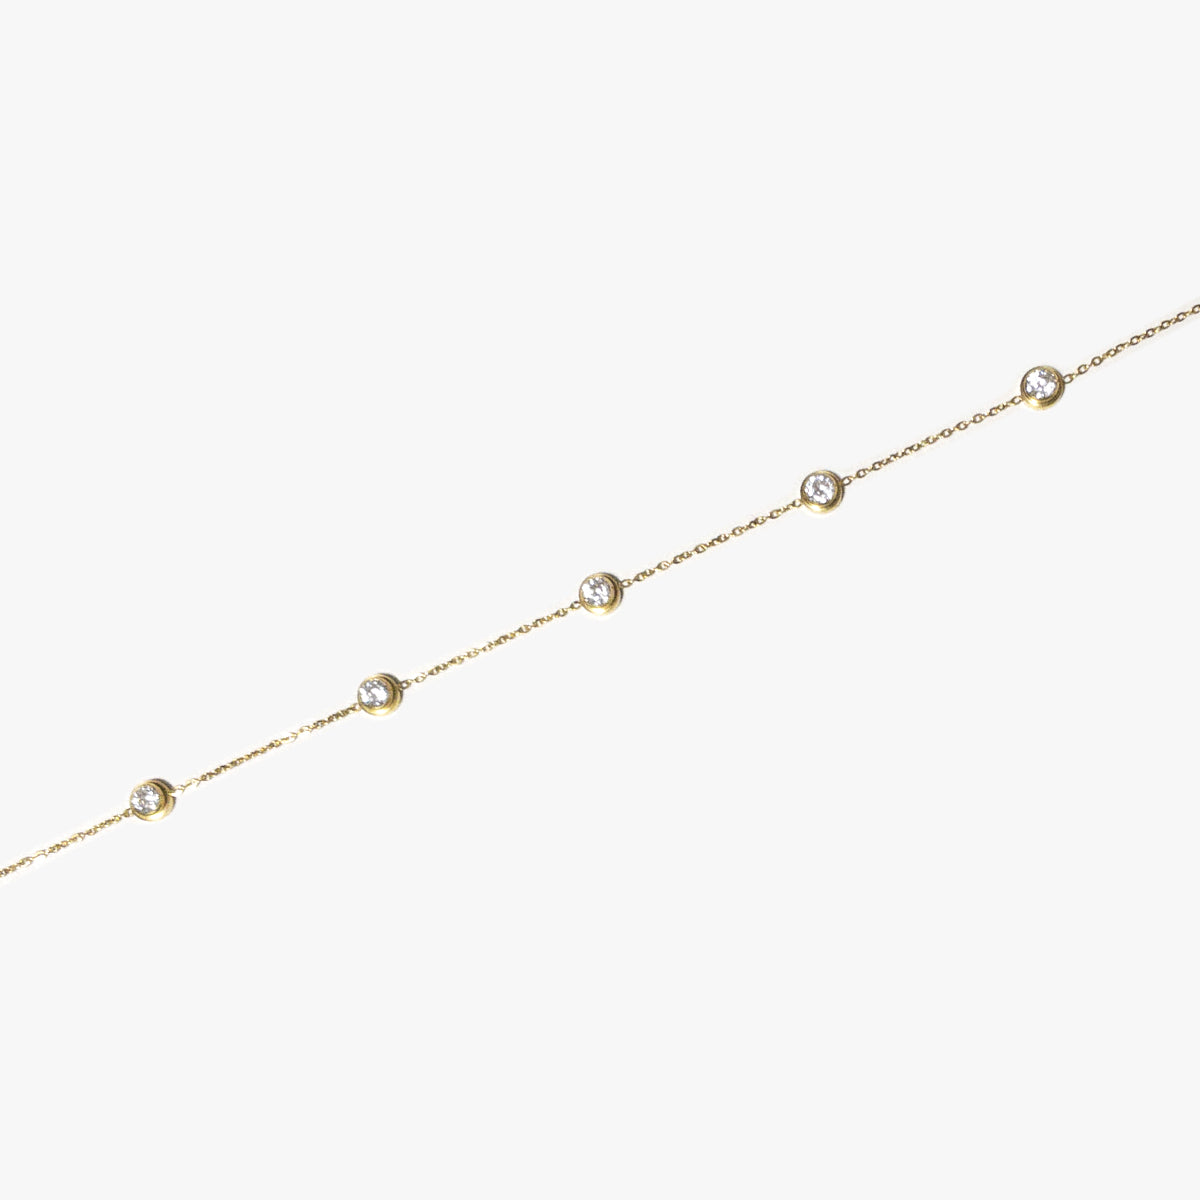 The Solitaire Station Bracelet and Anklet